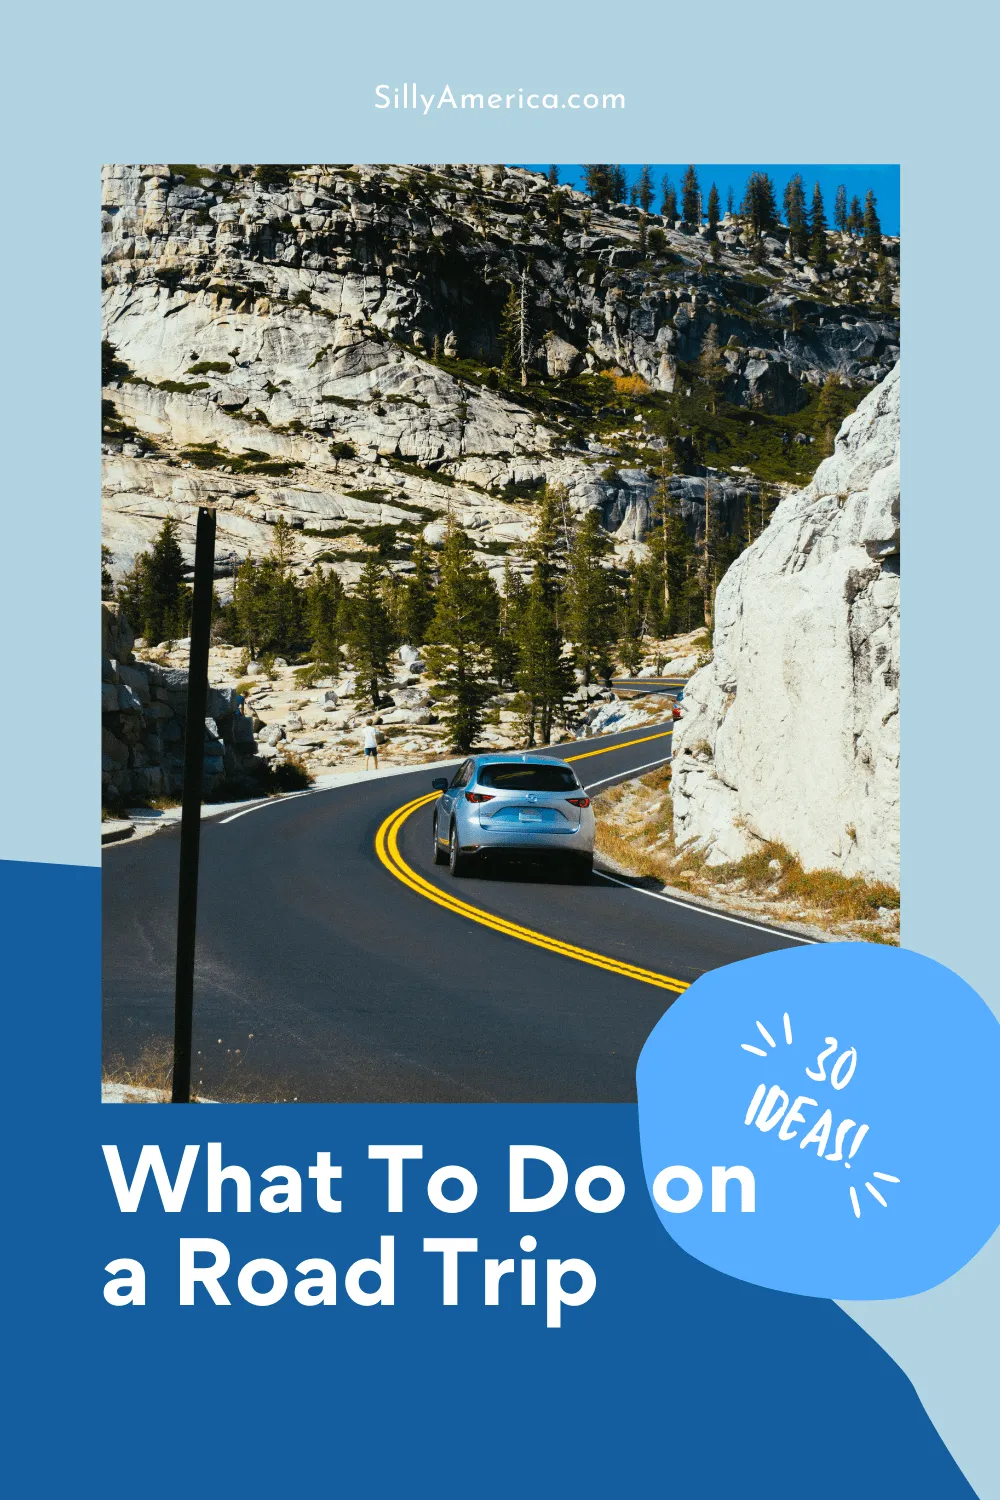 Planning on taking a long car trip but not totally sure what to do on a road trip? While there is no right or wrong answer, and everyone paves their own way, there are many common things to see, places to stop, and ways to pass the time. Need inspiration? Here are 30 ideas to help you plan an epic journey! #RoadTrip #RoadTripIdeas #RoadTripPlanning #RoadTripPlanningTips #CrossCountryRoadTripPlanning #RoadTripPlanningIdeas #RoadTripIdeas